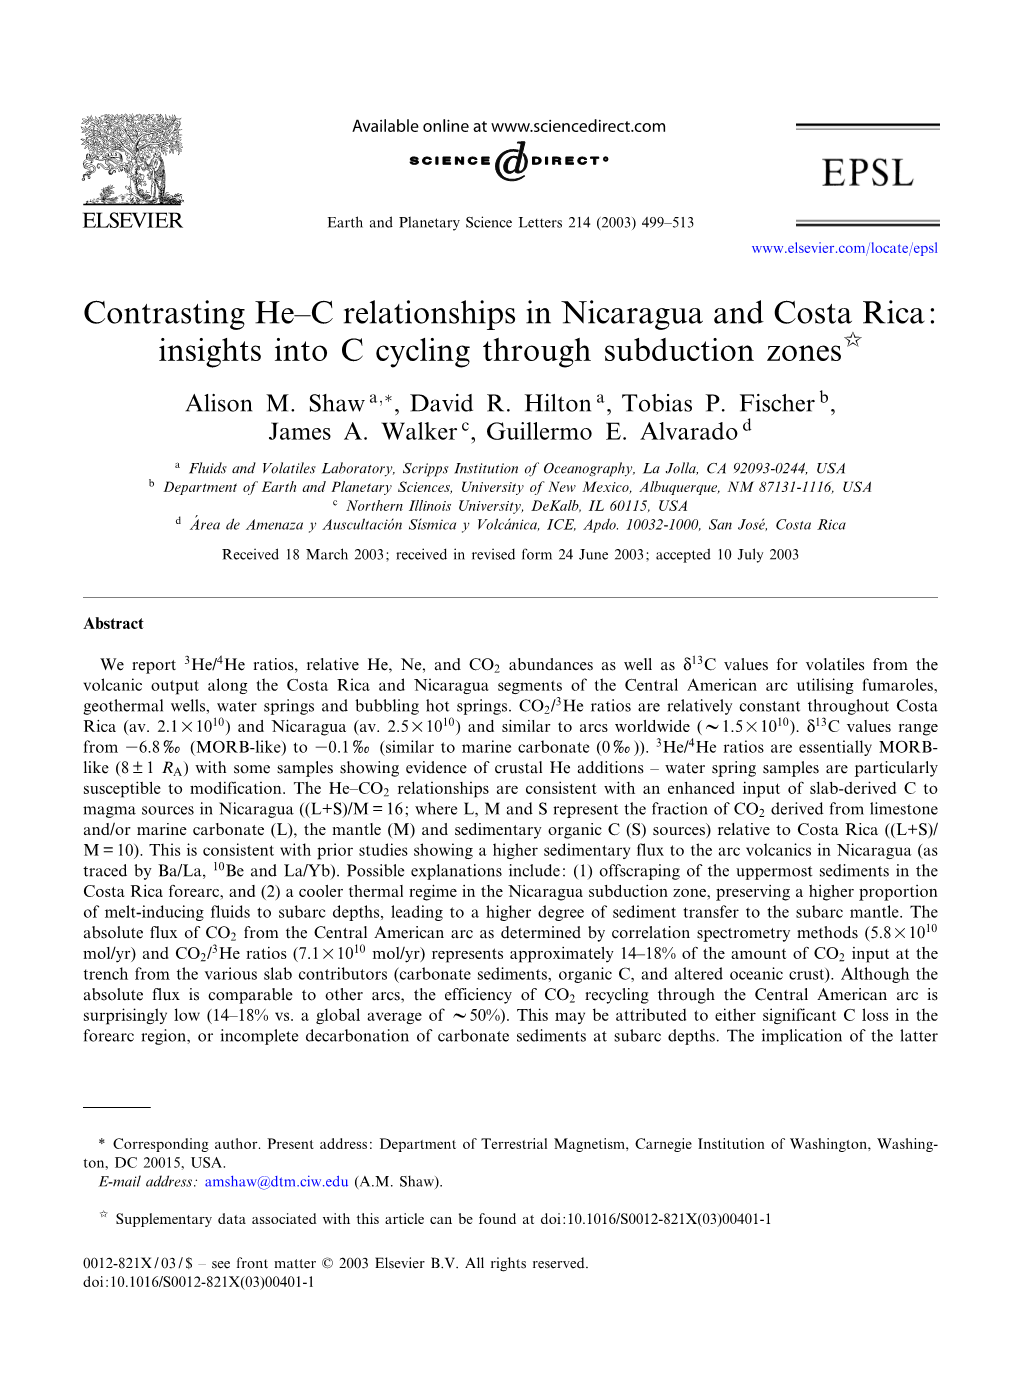 Contrasting He^C Relationships in Nicaragua and Costa Rica: Insights Into C Cycling Through Subduction Zones§